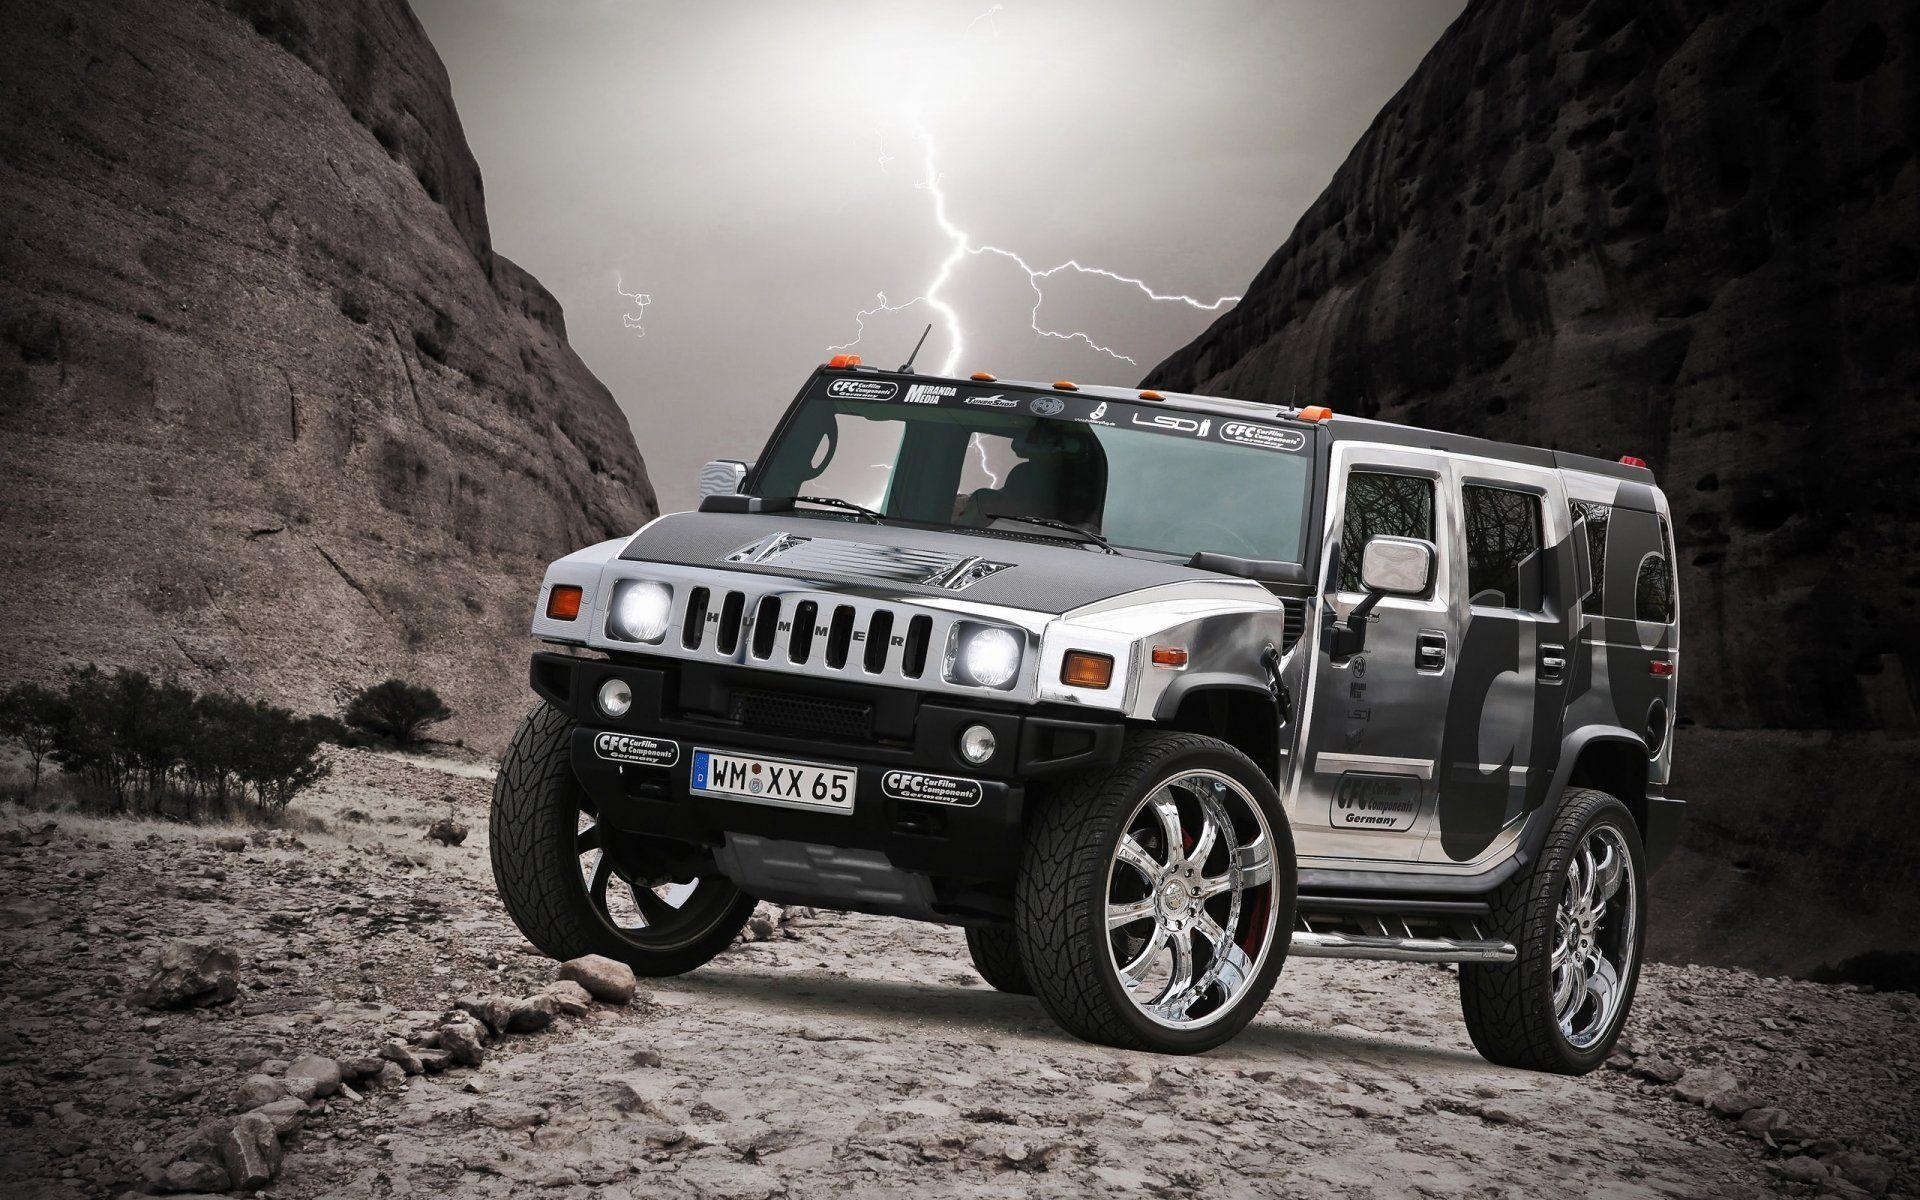 Hummer Wallpapers For Mobile Phones